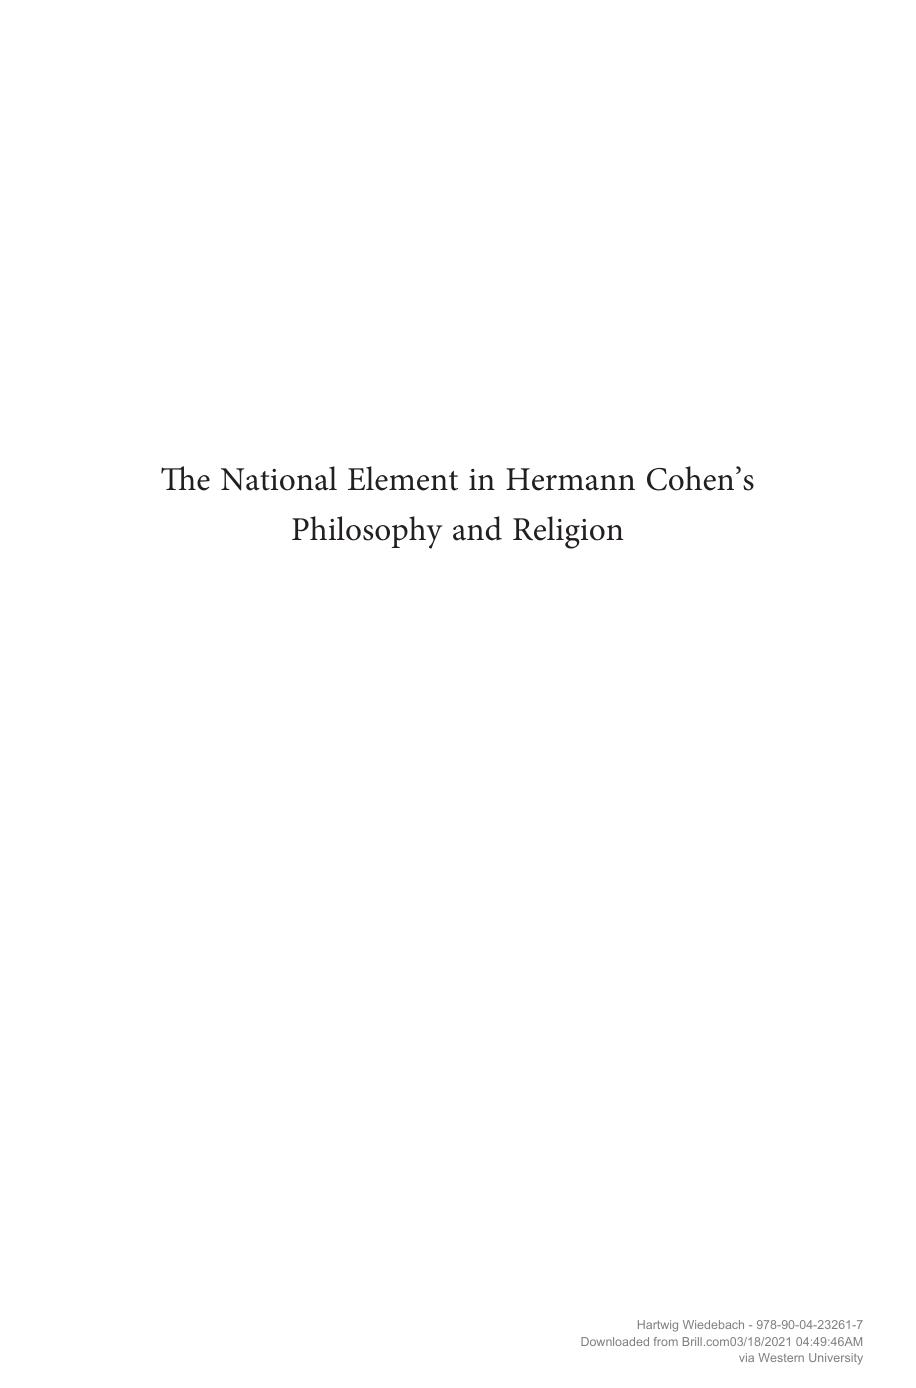 The National Element in Hermann Cohen's Philosophy and Religion